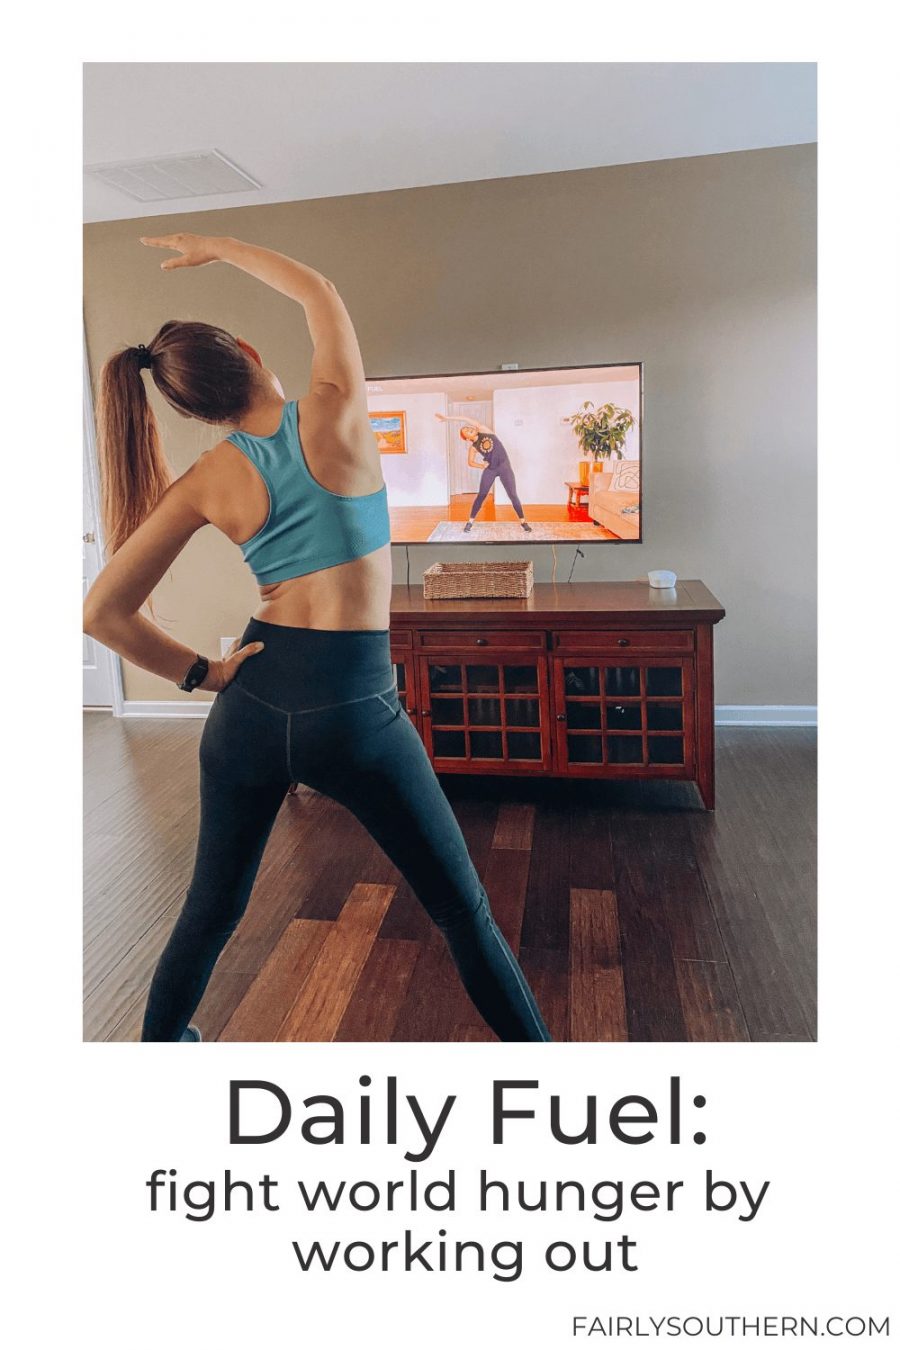 Daily Fuel Review: Give Back While Working Out!